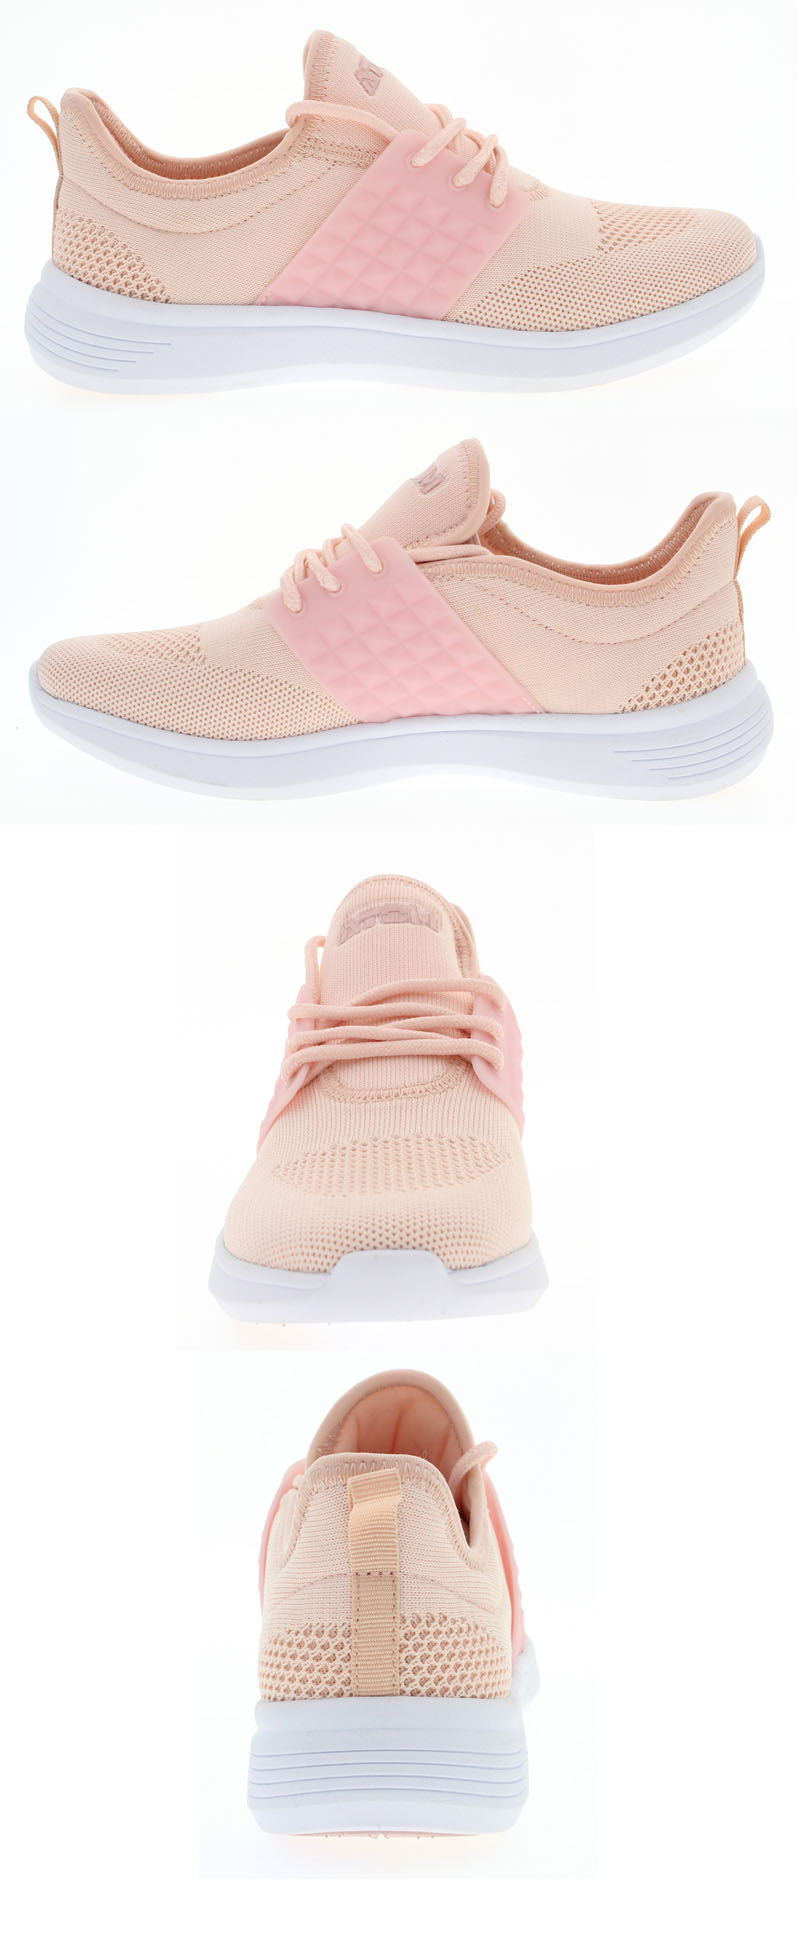 Nude pink shoes withPVC support